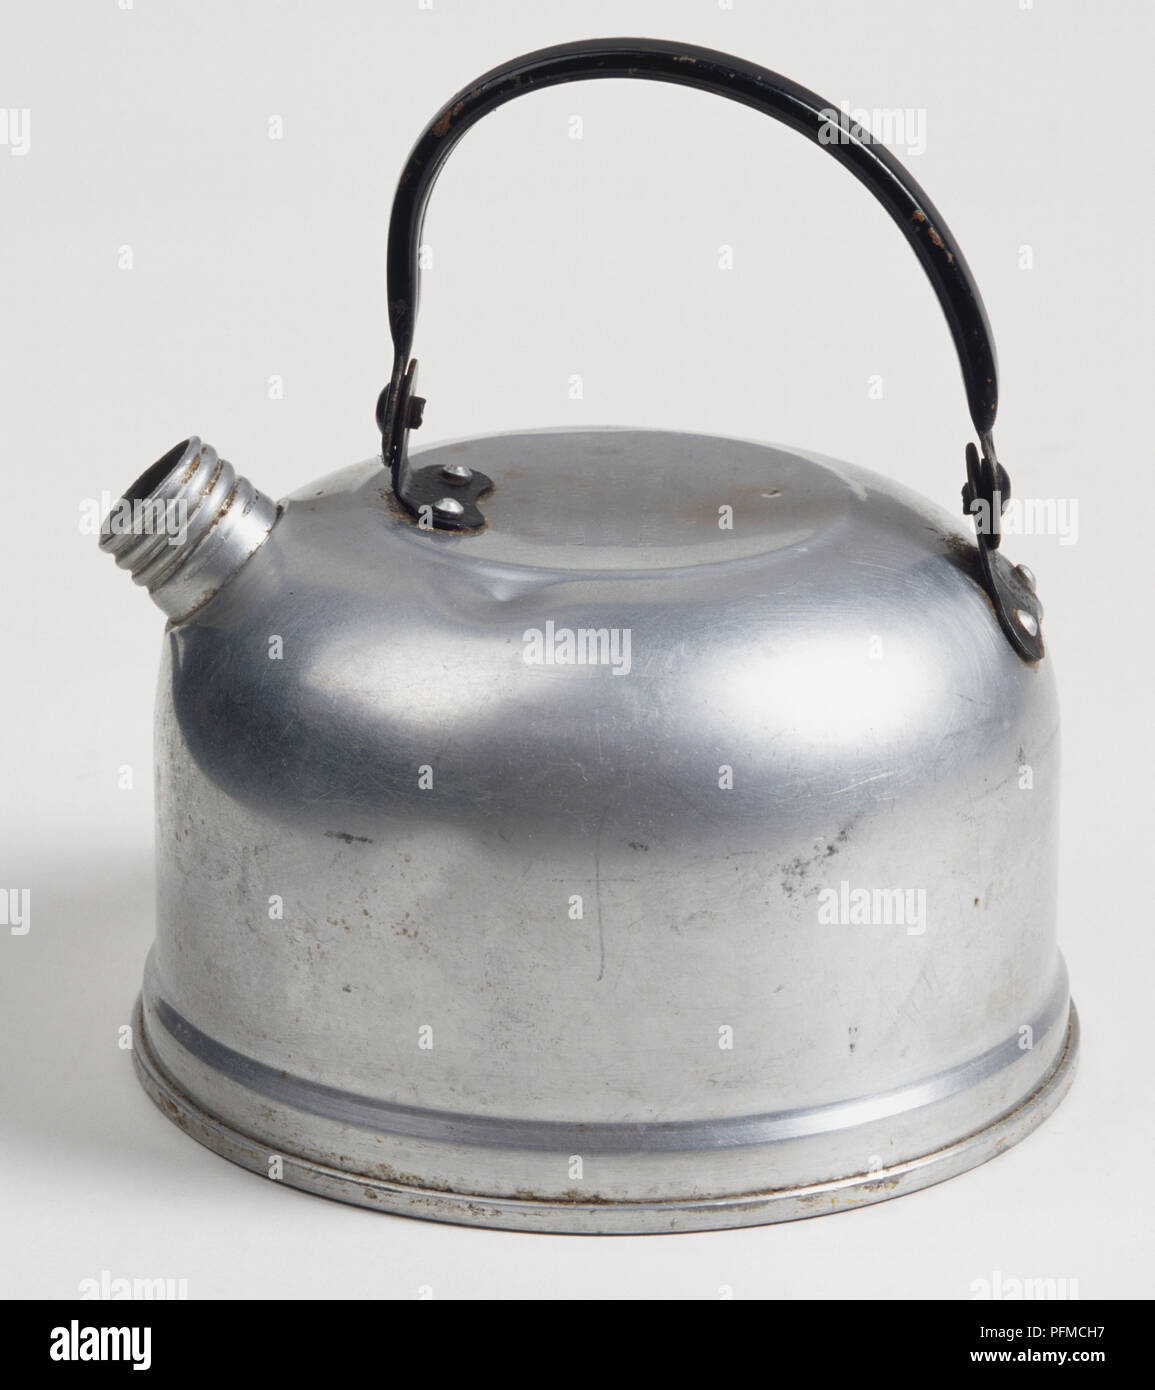 Small camping kettle made of metal, with black handle and short spout, side view. Stock Photo